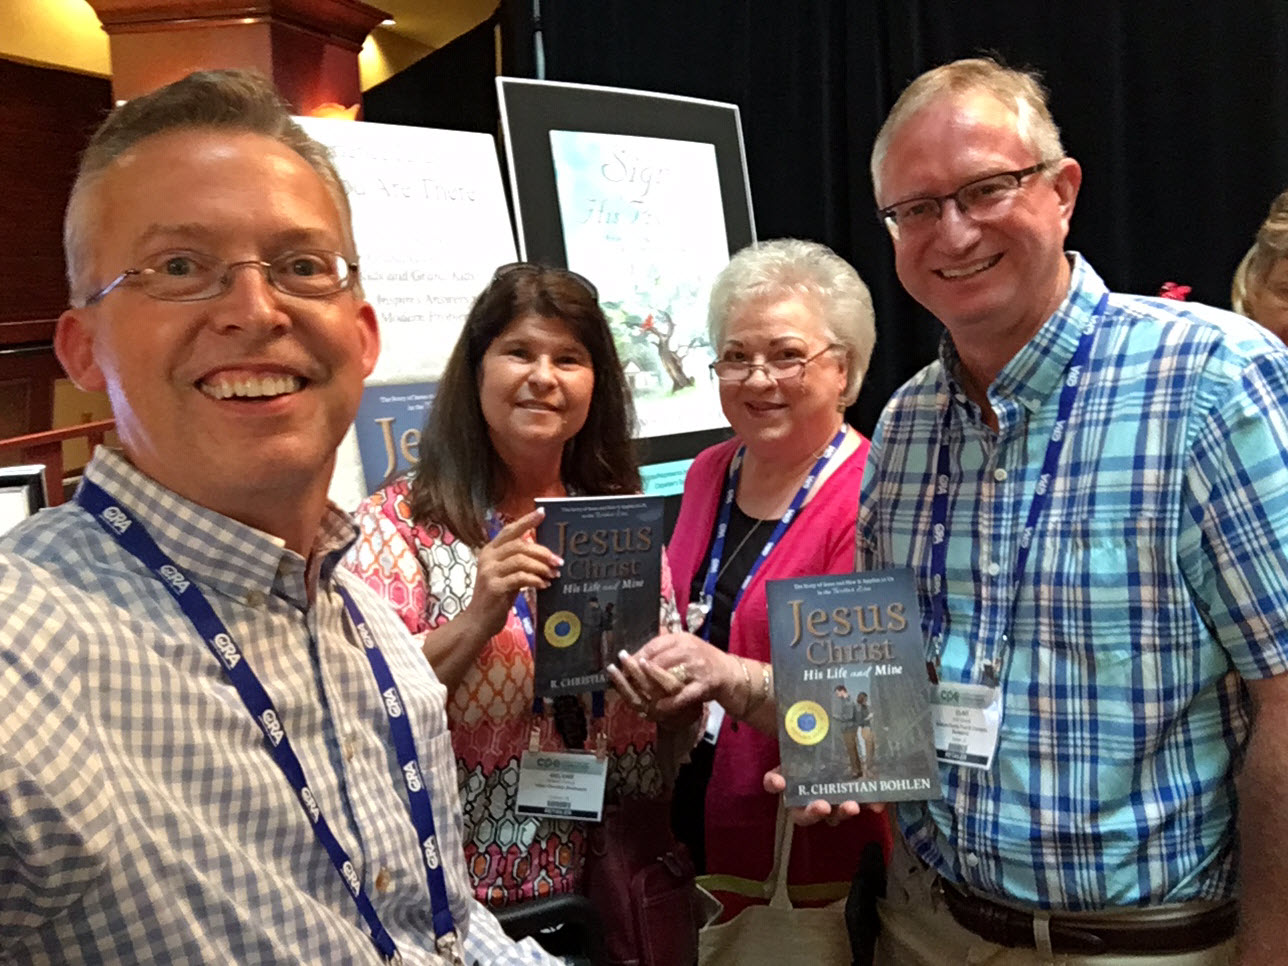 R Christian Bohlen with bookstore owners at a recent Christian book conference